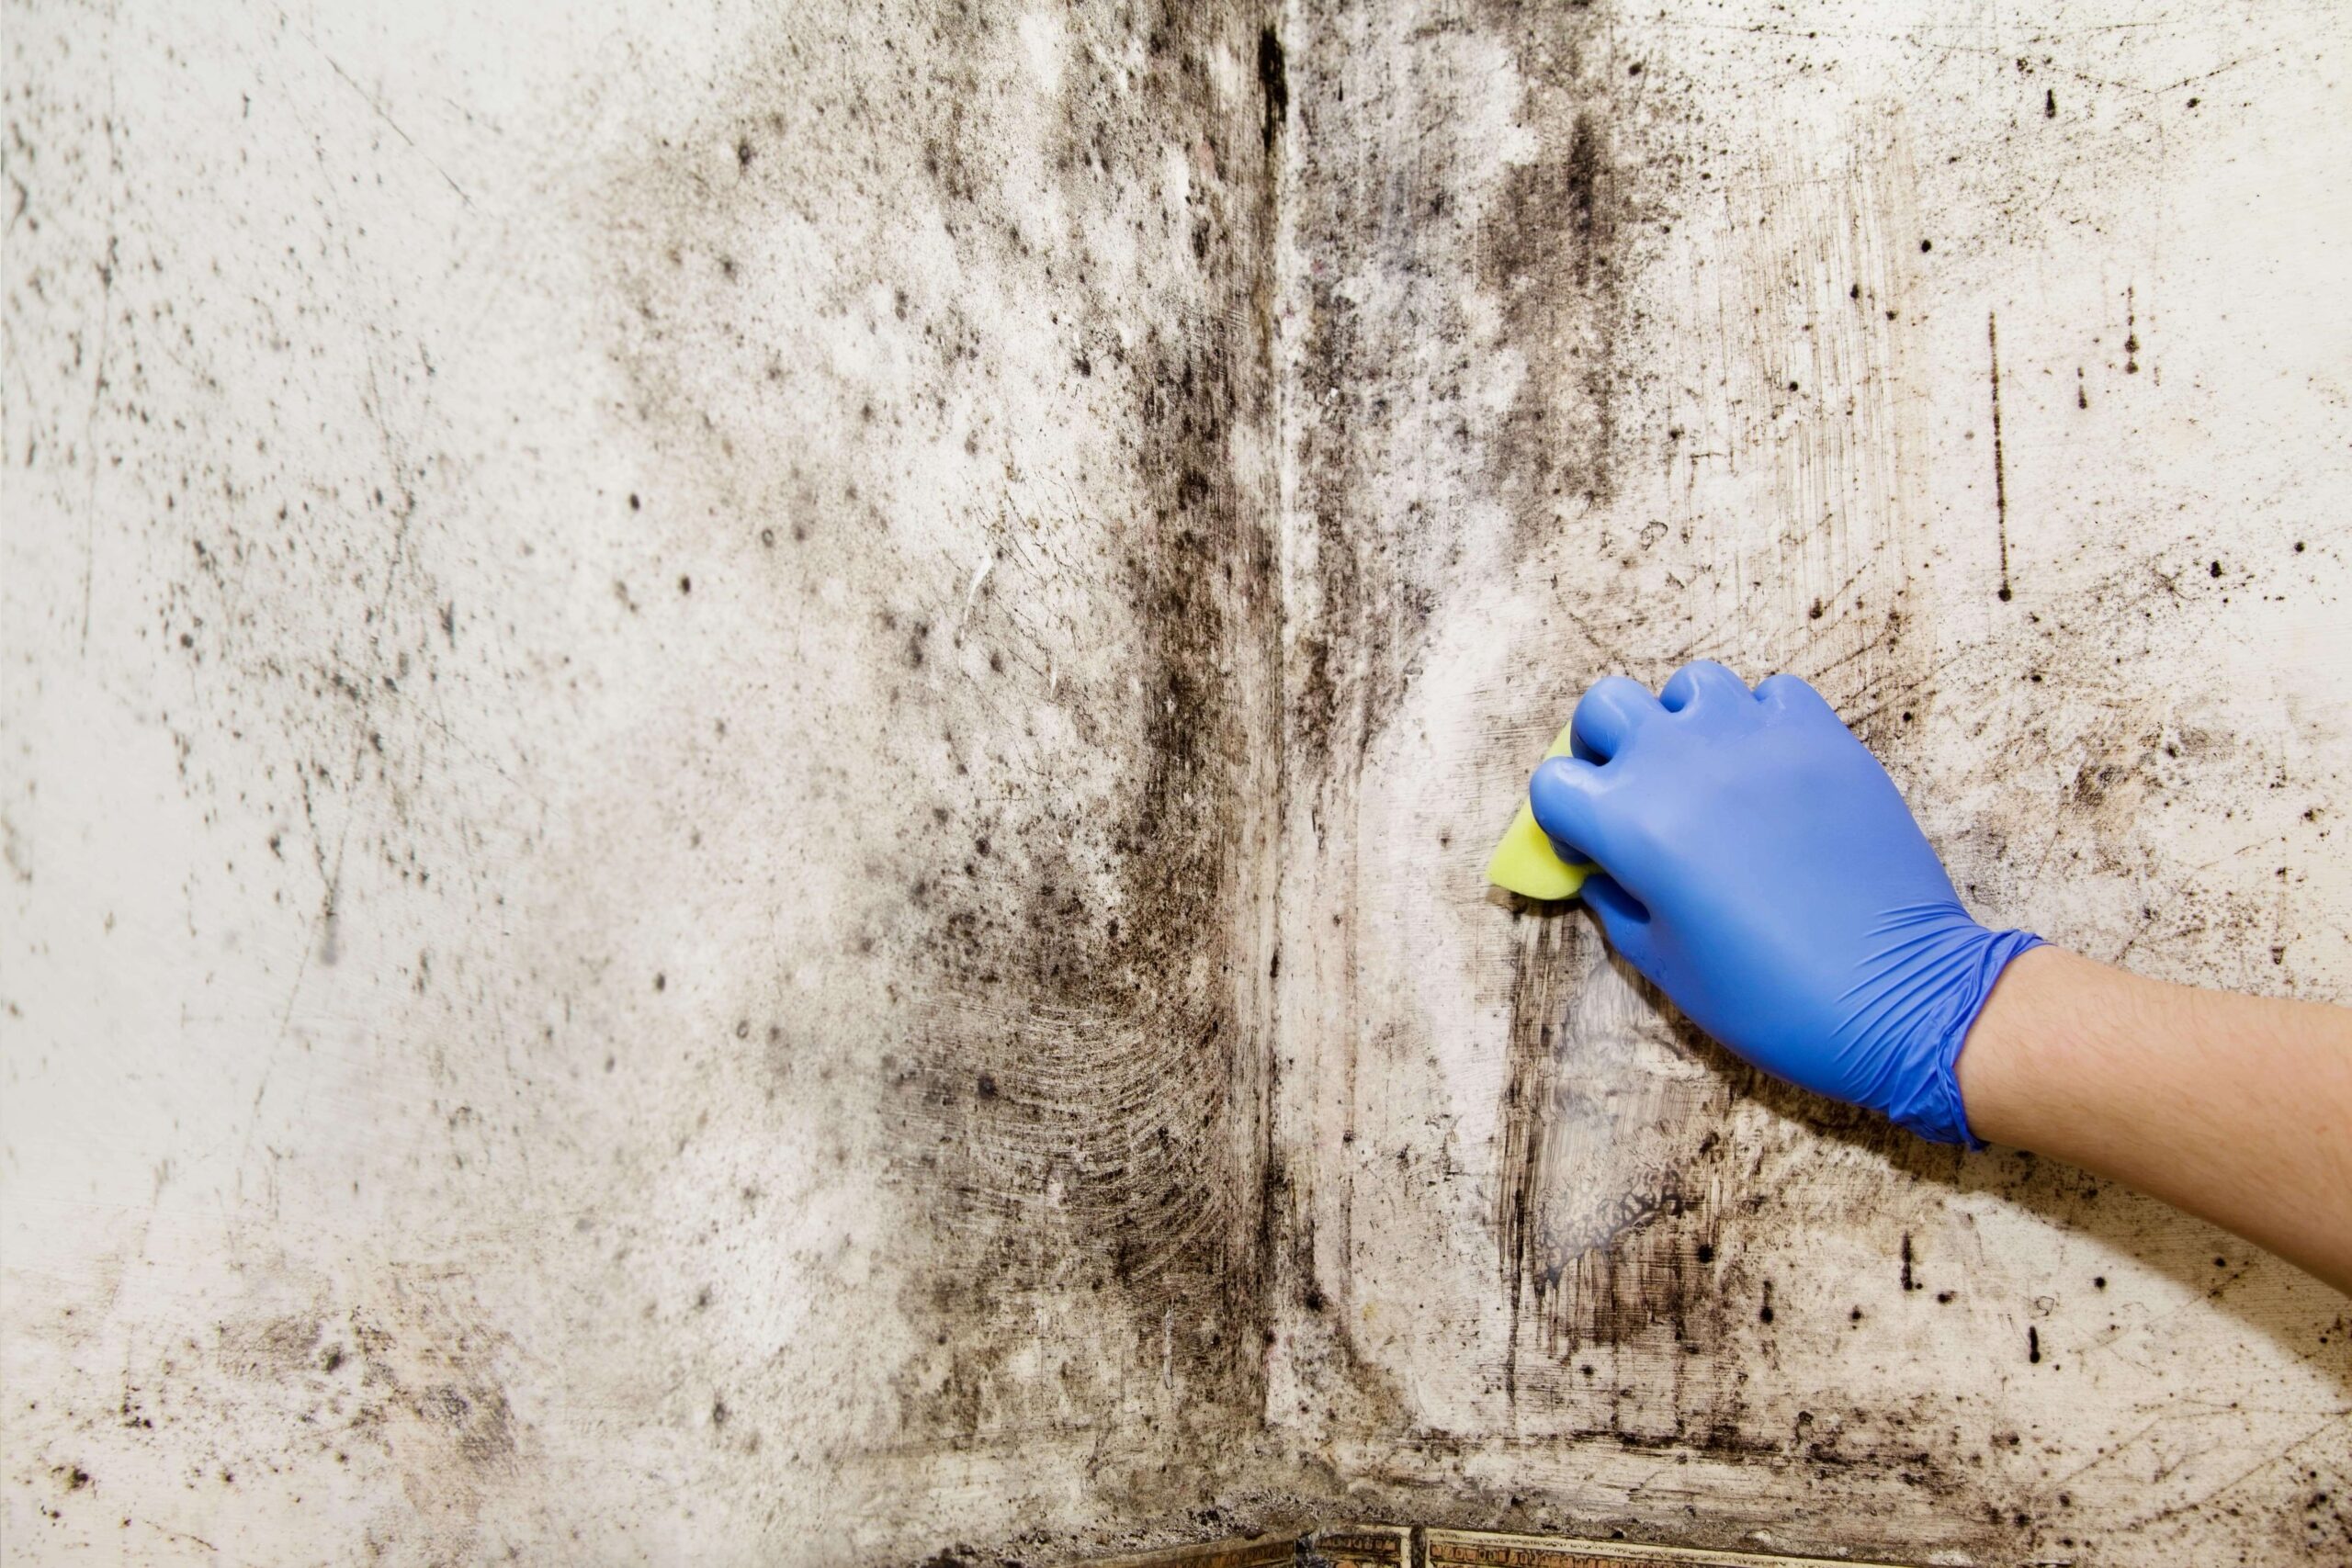 Hand cleans mold in the house